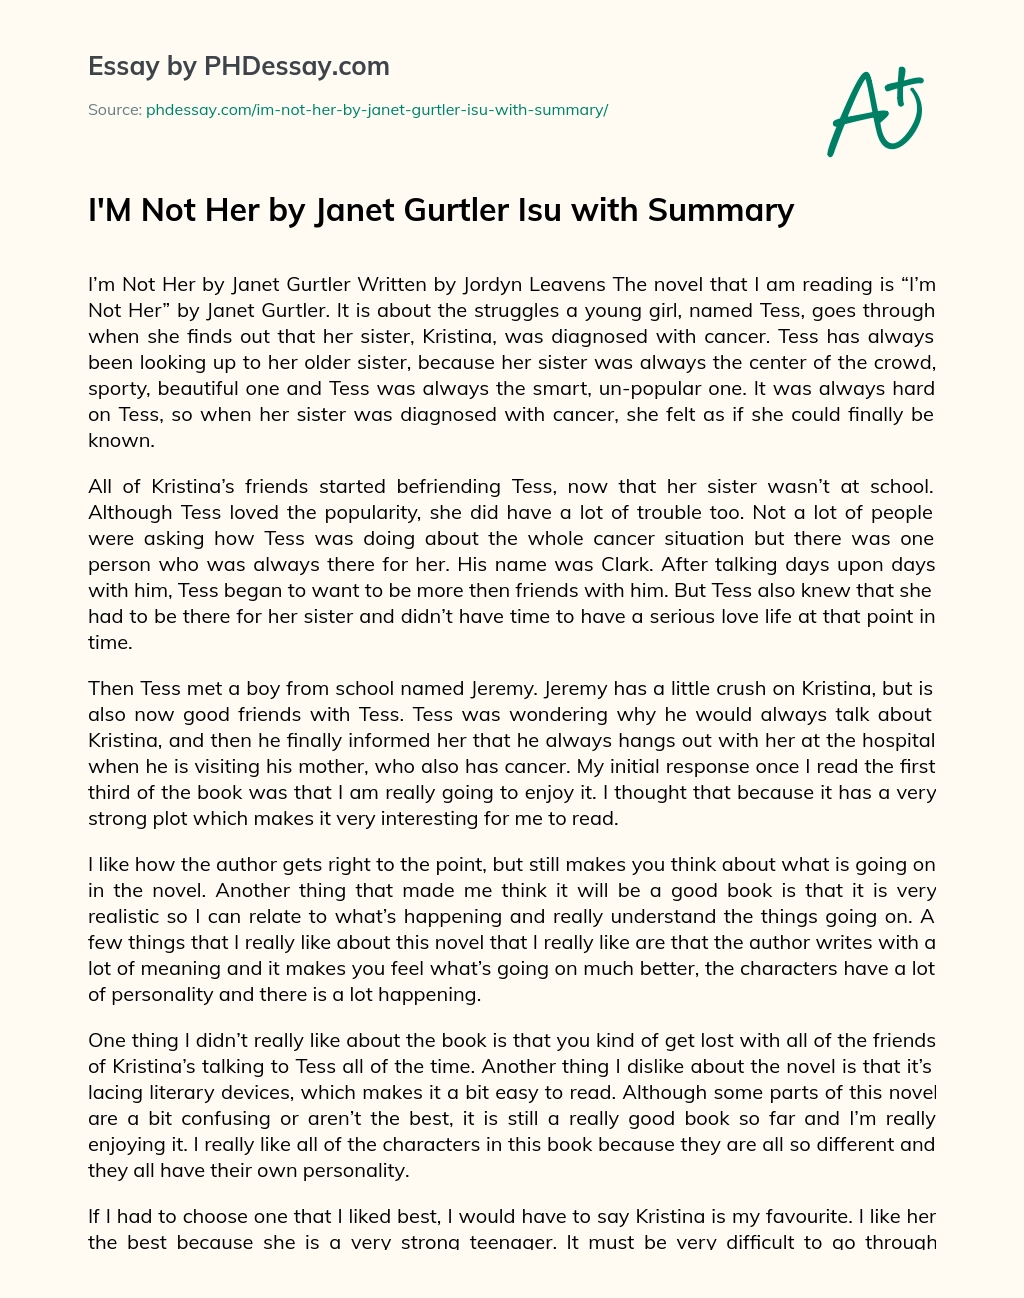 I’M Not Her by Janet Gurtler Isu with Summary essay